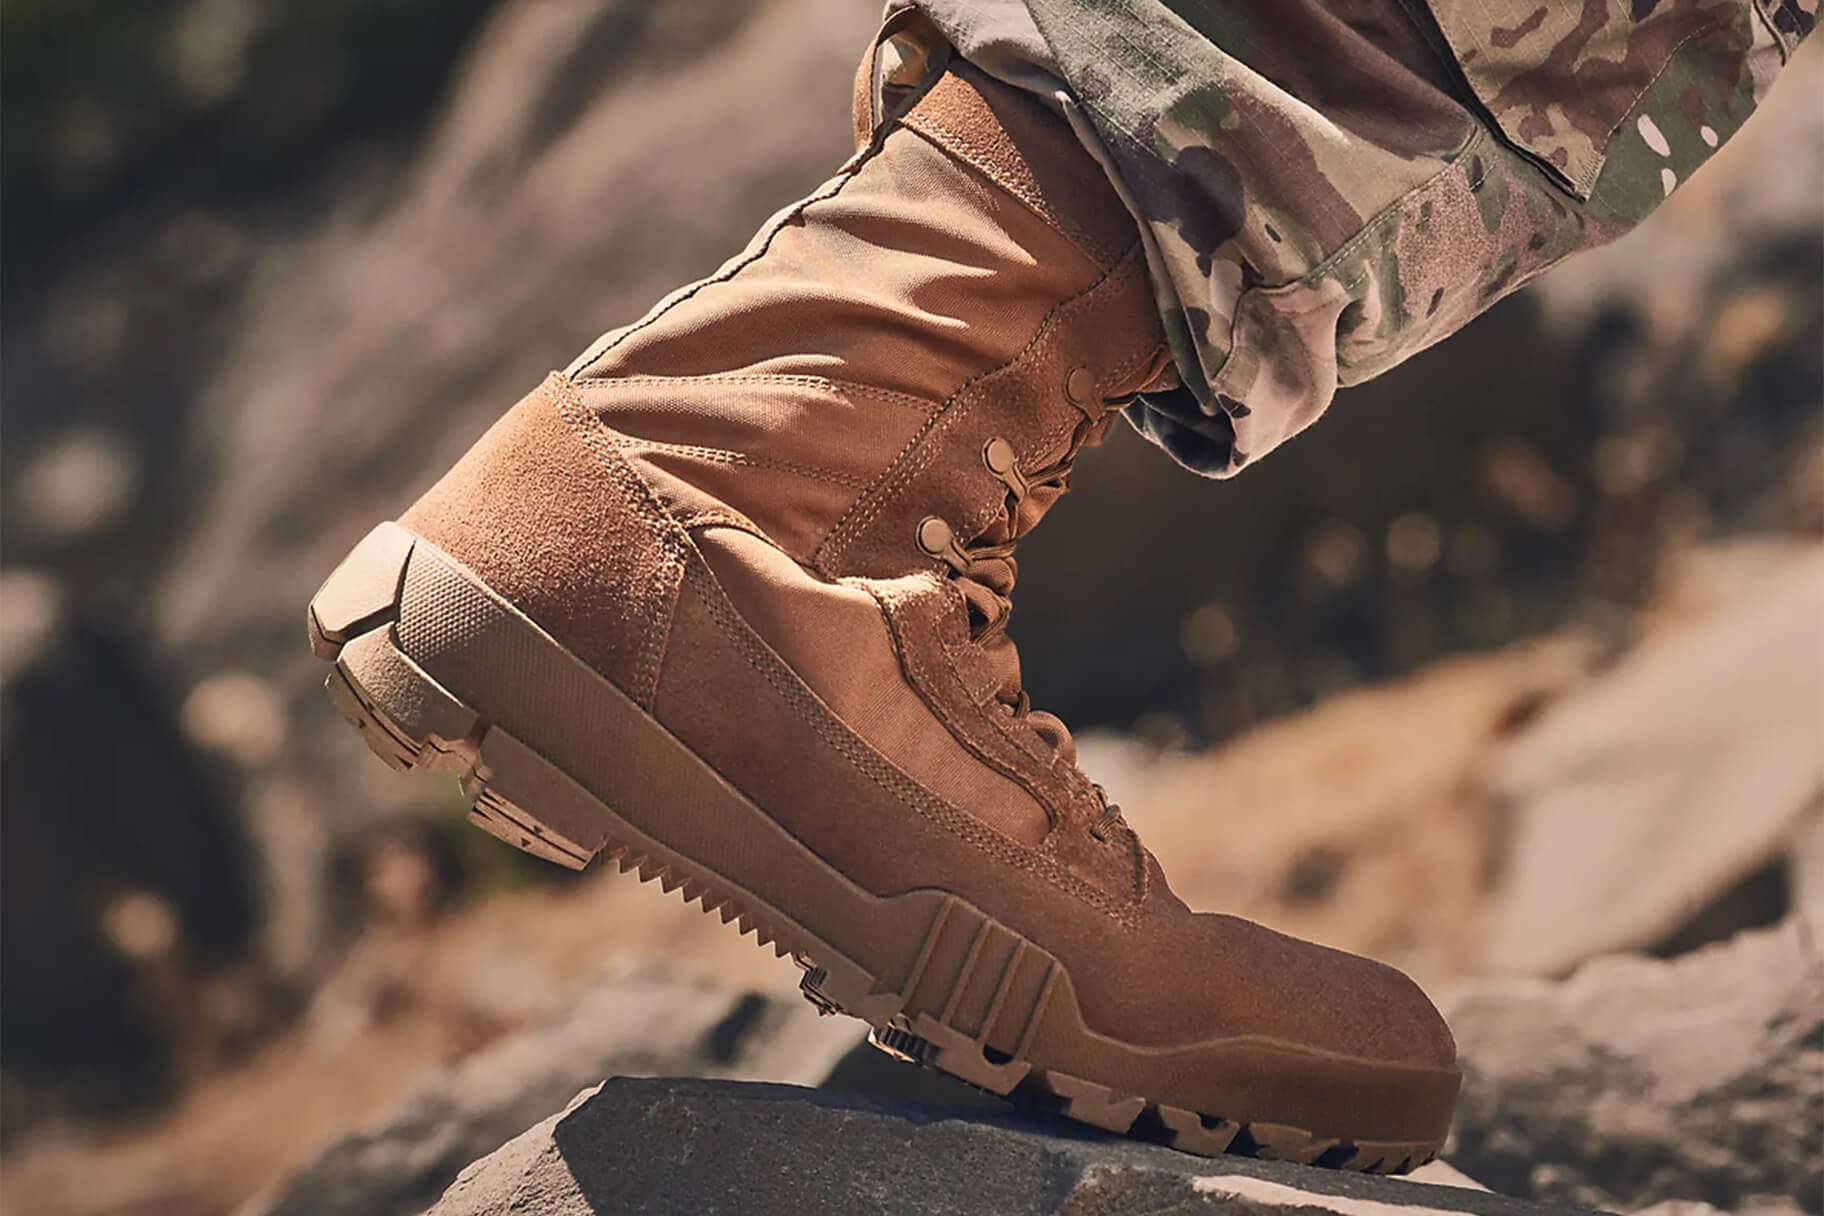 Maravilloso hueco hecho The 6 Best Tactical Boots From Nike. Nike.com